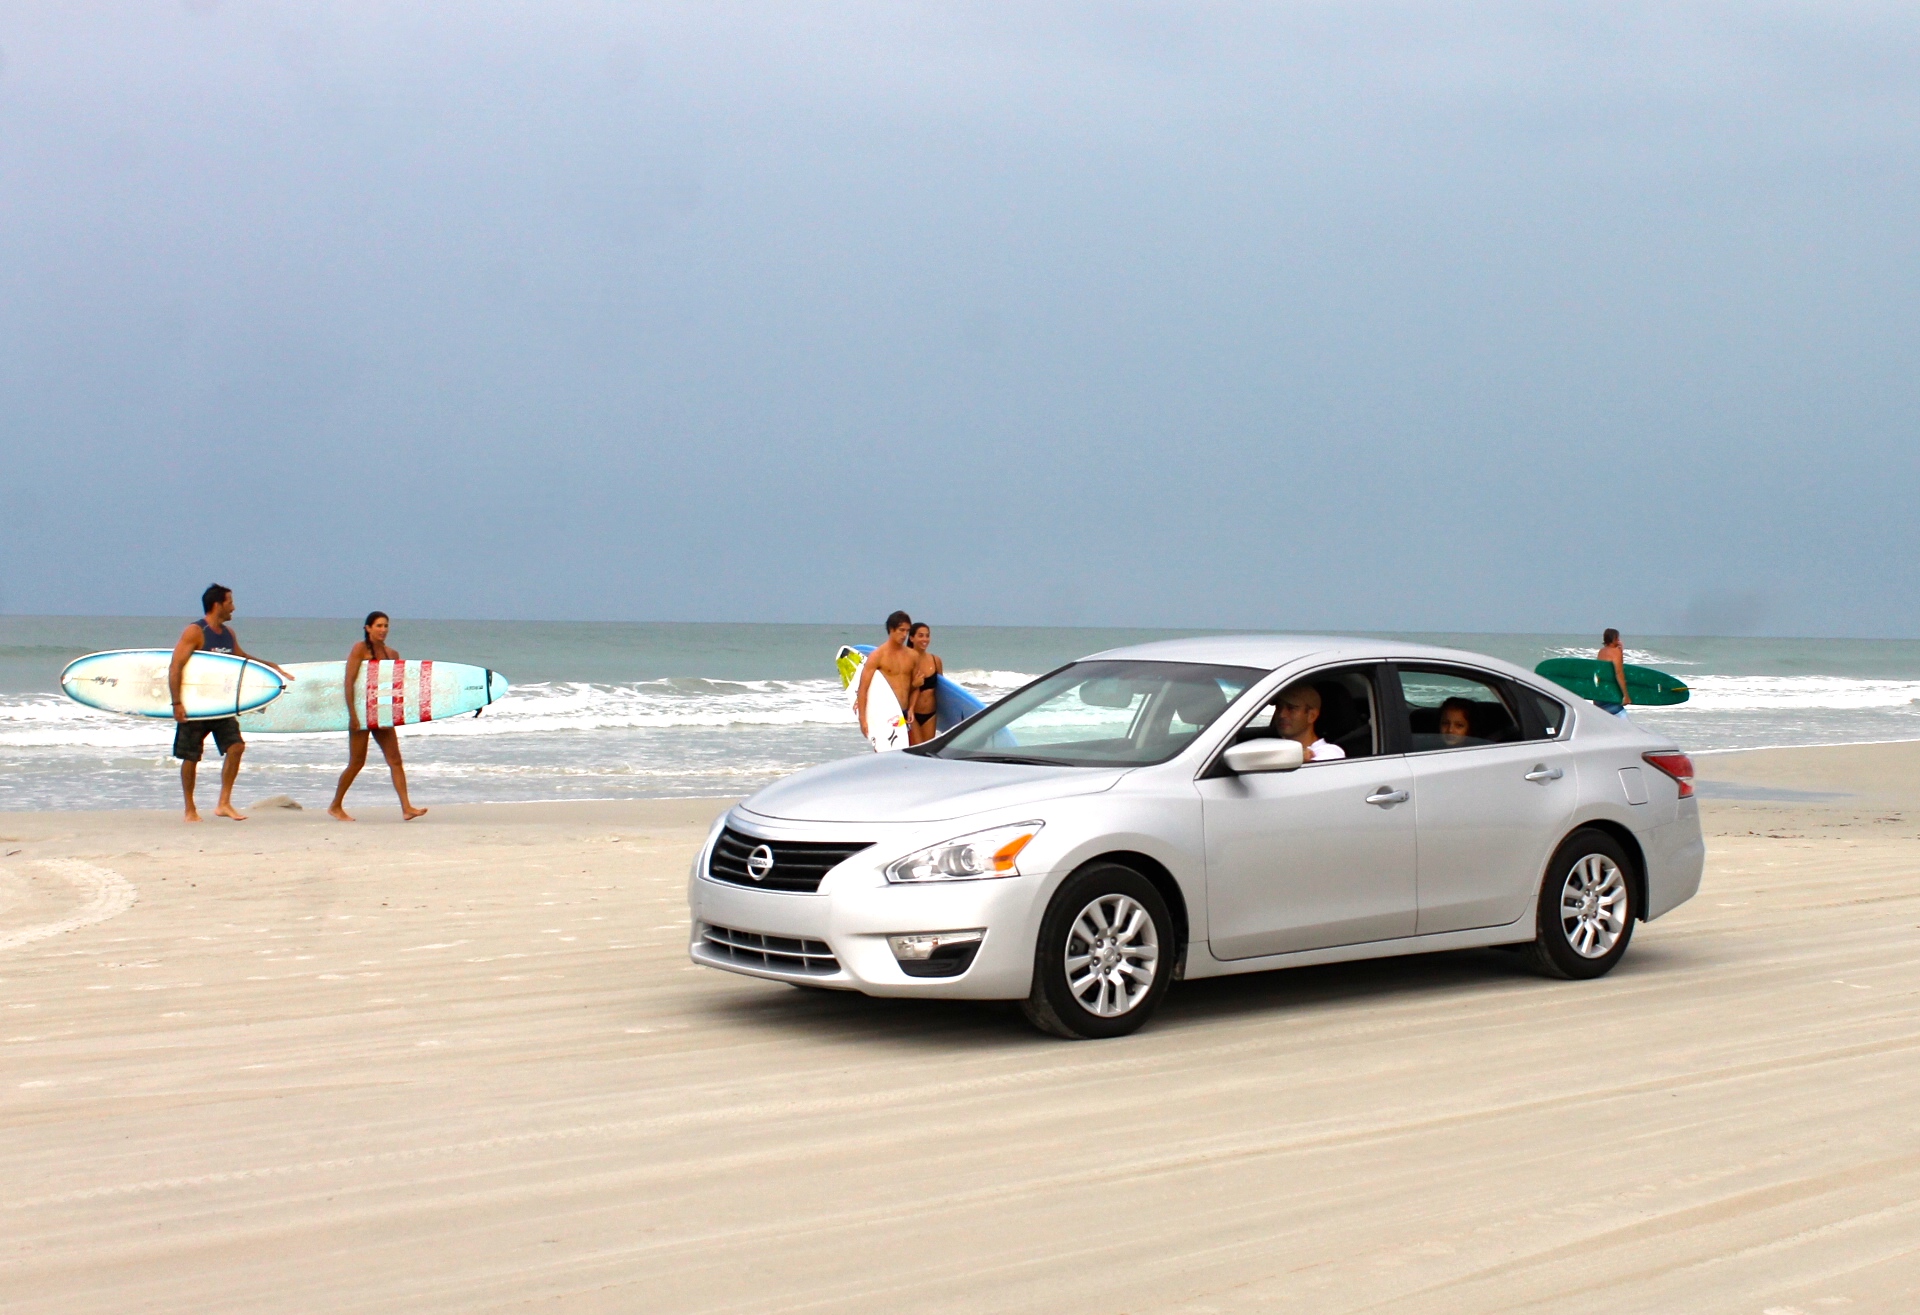 Nissan Altima driving on the beach with surfers